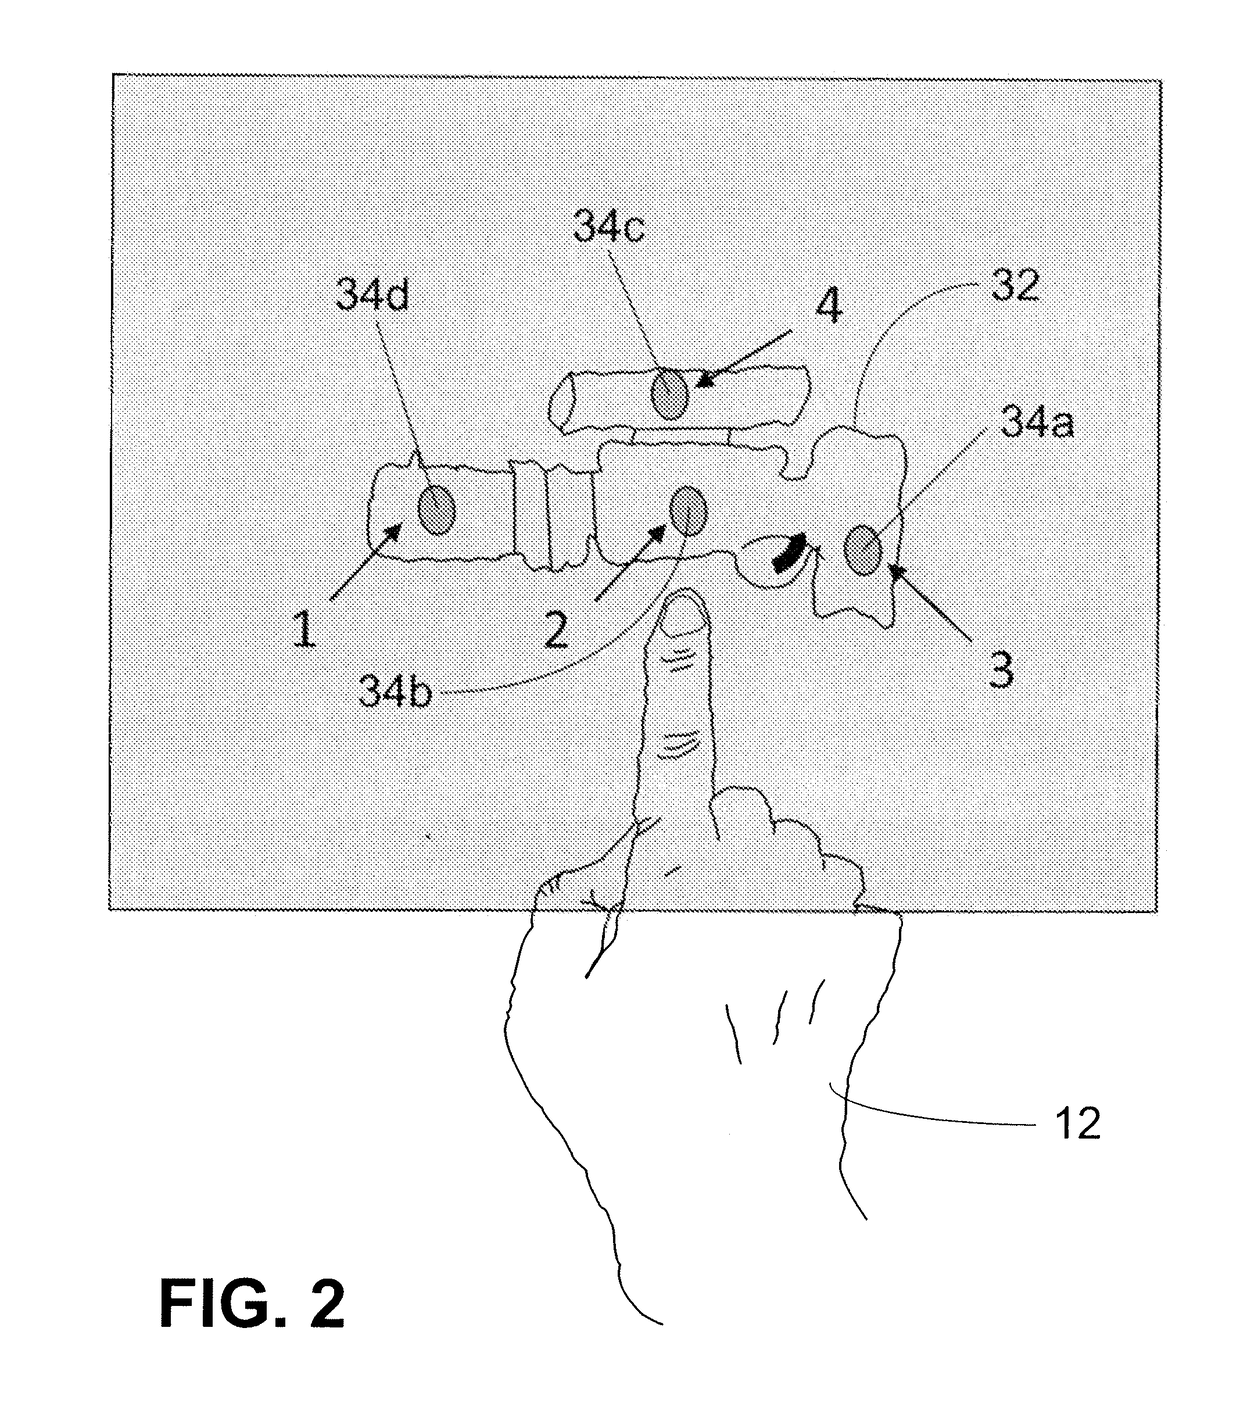 System and method for providing complex haptic stimulation during input of control gestures, and relating to control of virtual equipment